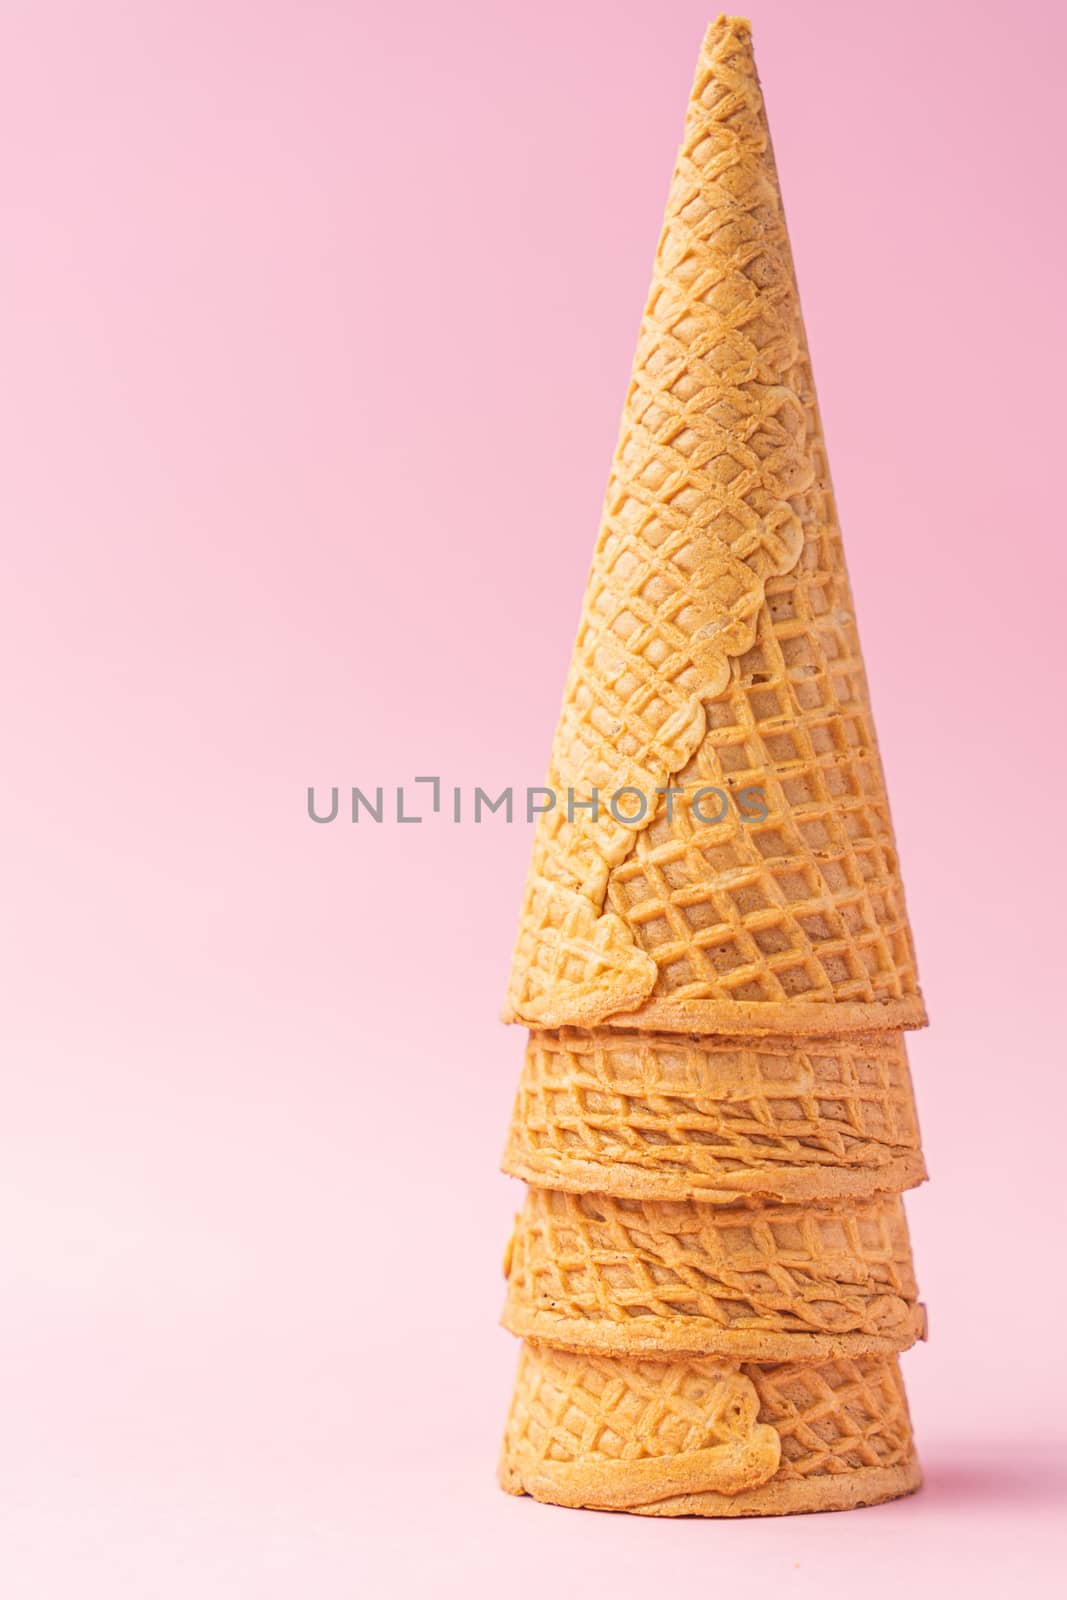 Three wheat flour ice cream cones upside down one on top of the other on a pink background. Summer concept.